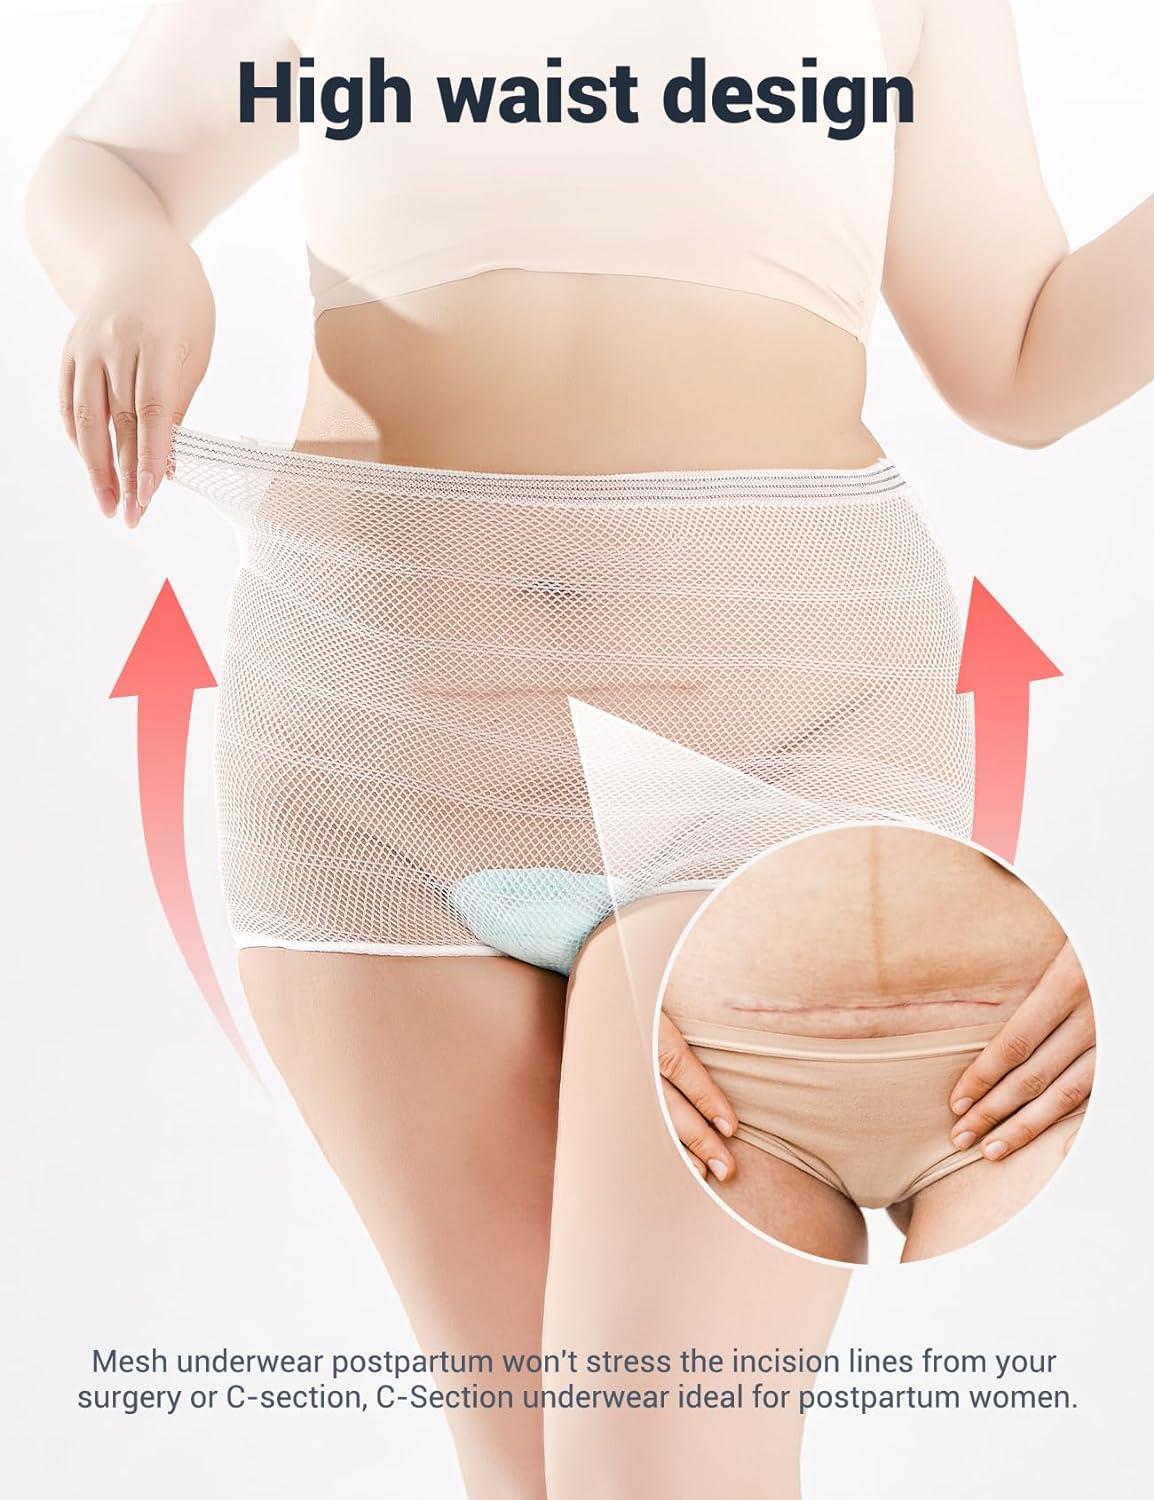 HANSILK Disposable Maternity Knickers Mesh Maternity Knickers